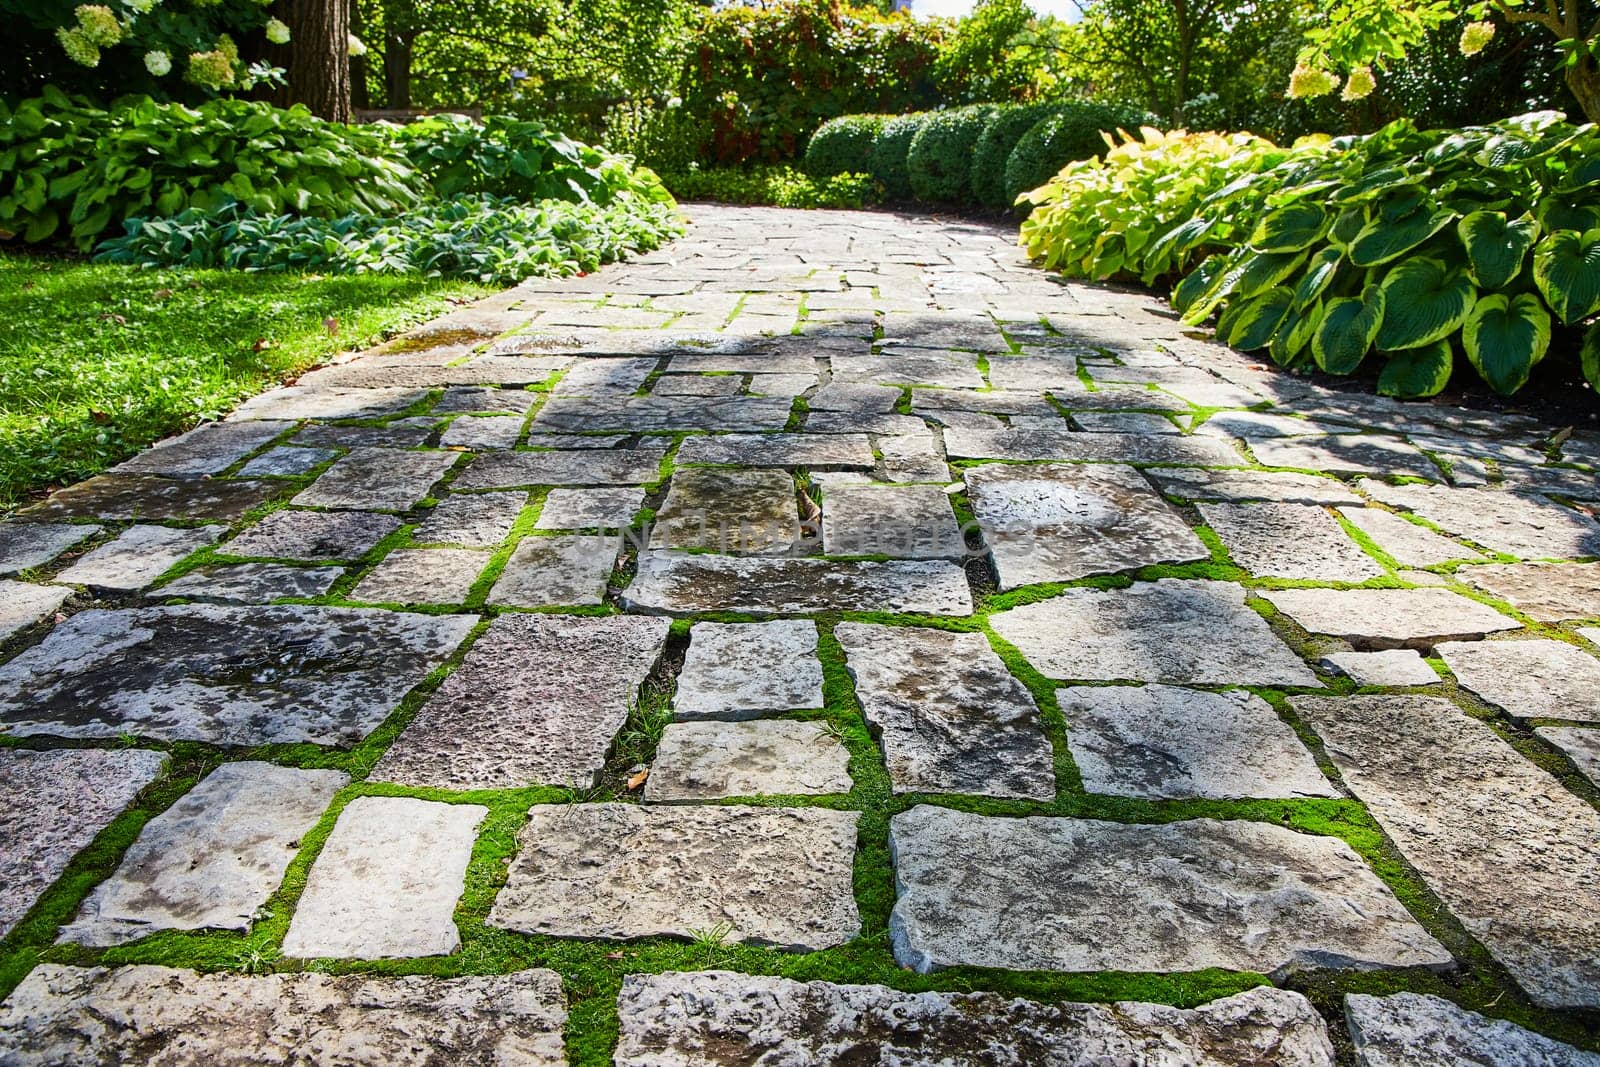 Tranquil Cobblestone Pathway with Lush Greenery, Garden Perspective by njproductions